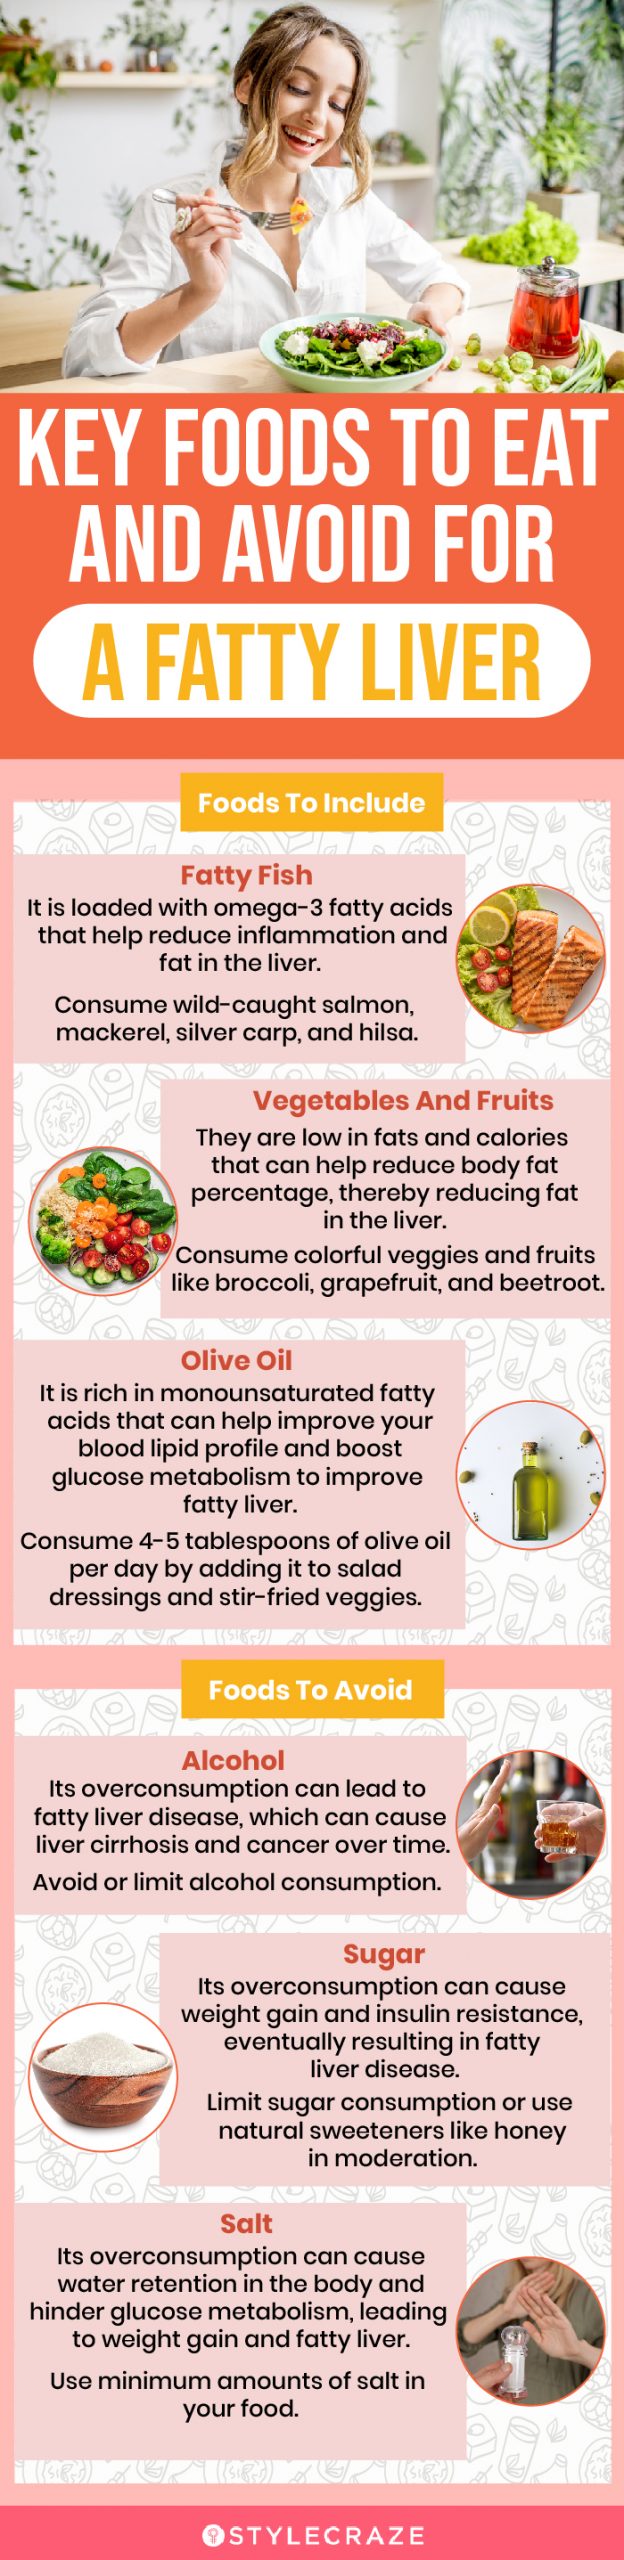 key foods to eat and avoid for a fatty liver (infographic)